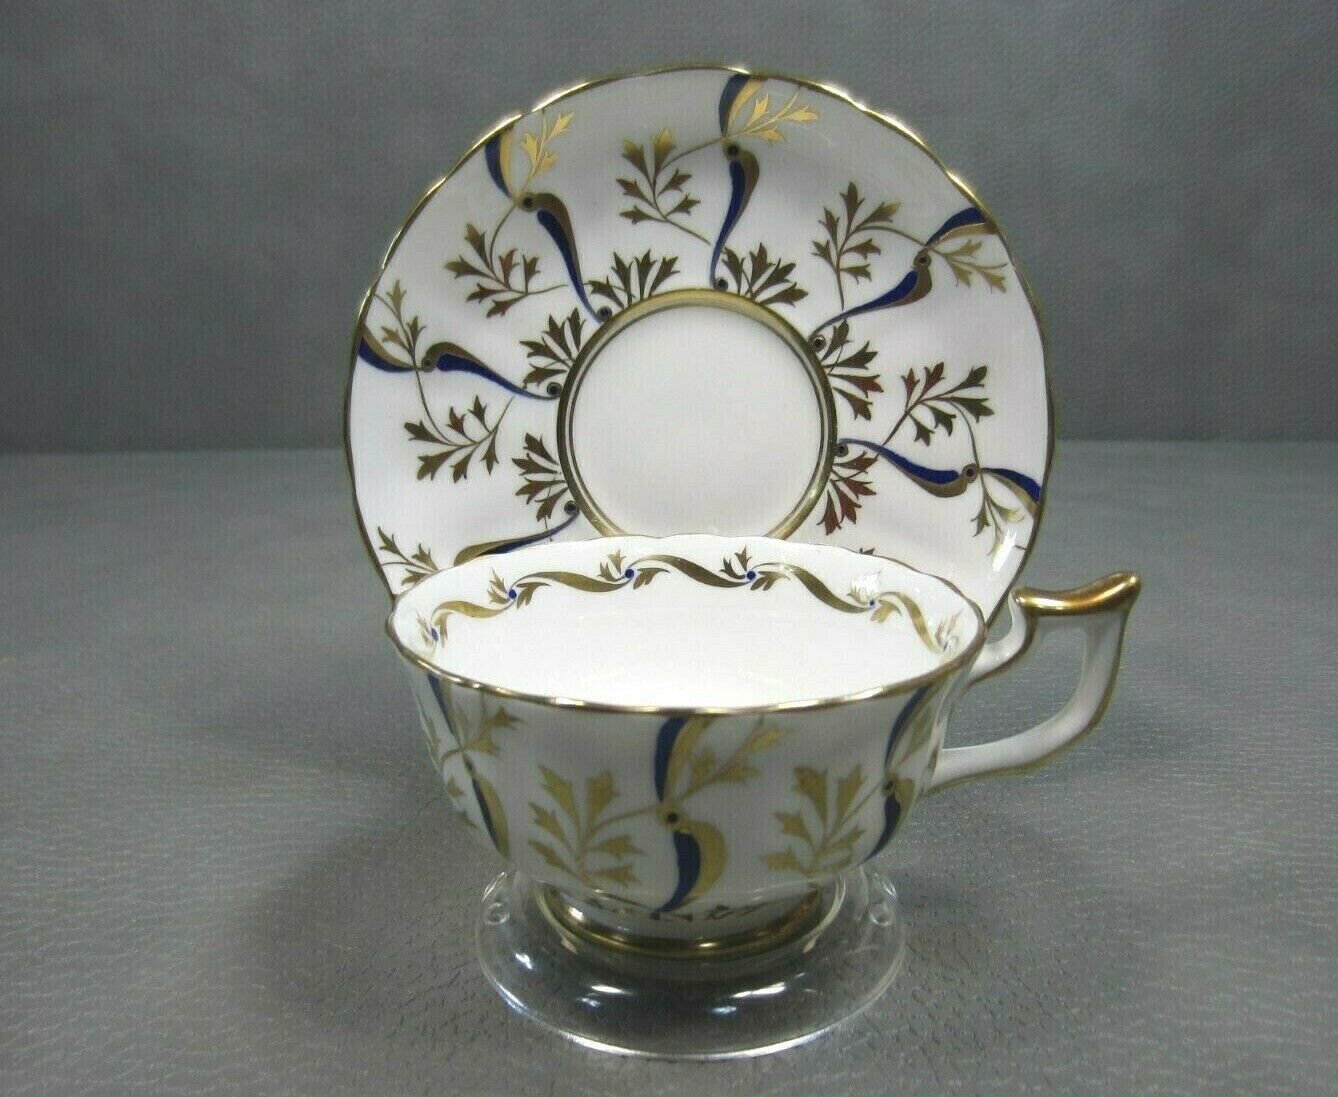 Royal Chelsea English Bone China Teacup and Saucer 189A Gold Leaves with Blue 